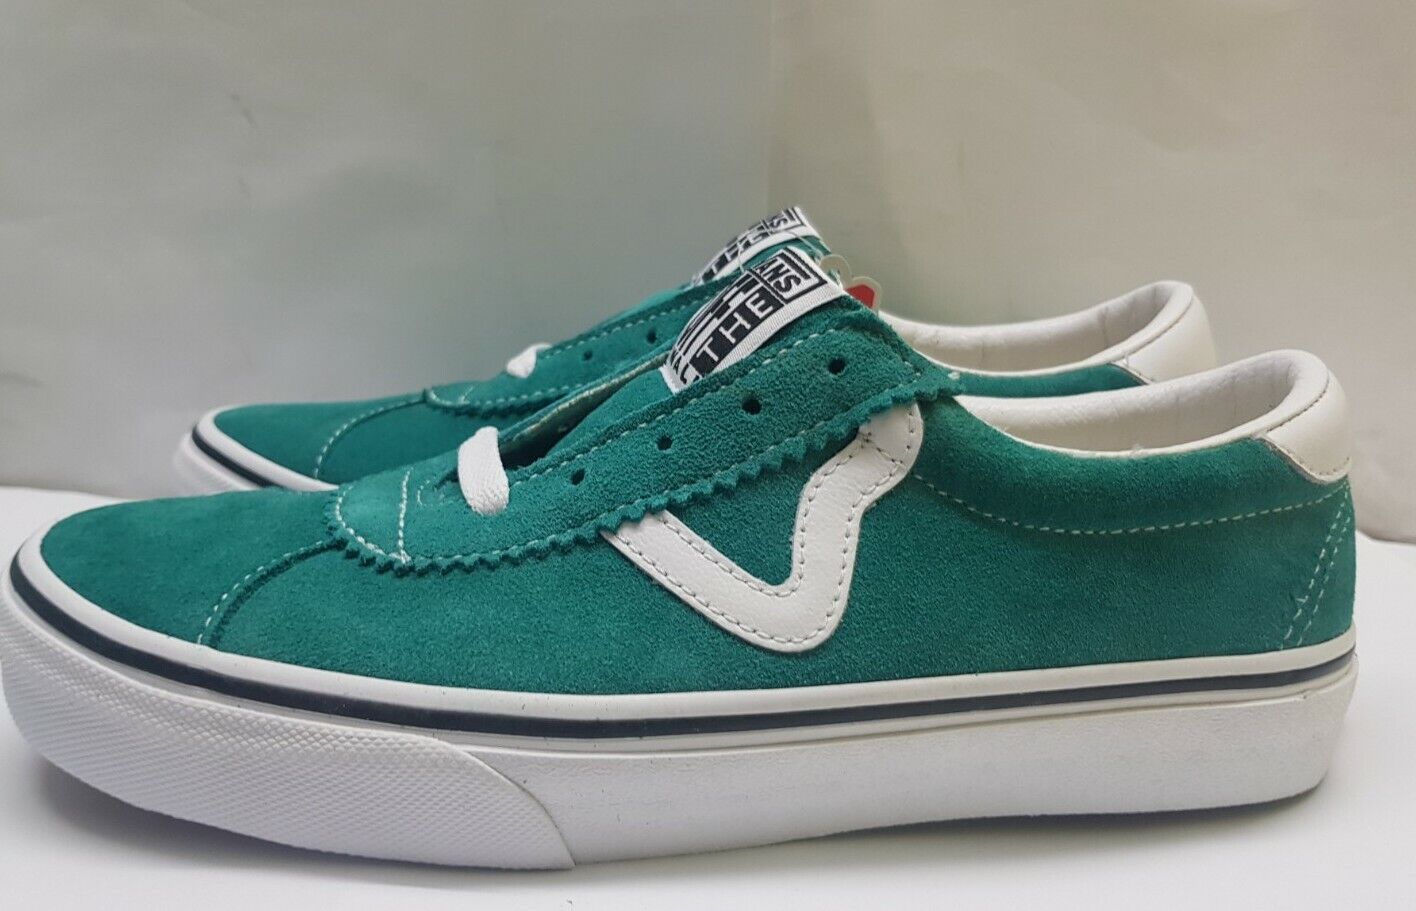 DSS# VANS SPORT TRAINERS IN Max 46% OFF GREEN TIDEPOOL SUEDE High quality 38 EU 6 SIZE UK